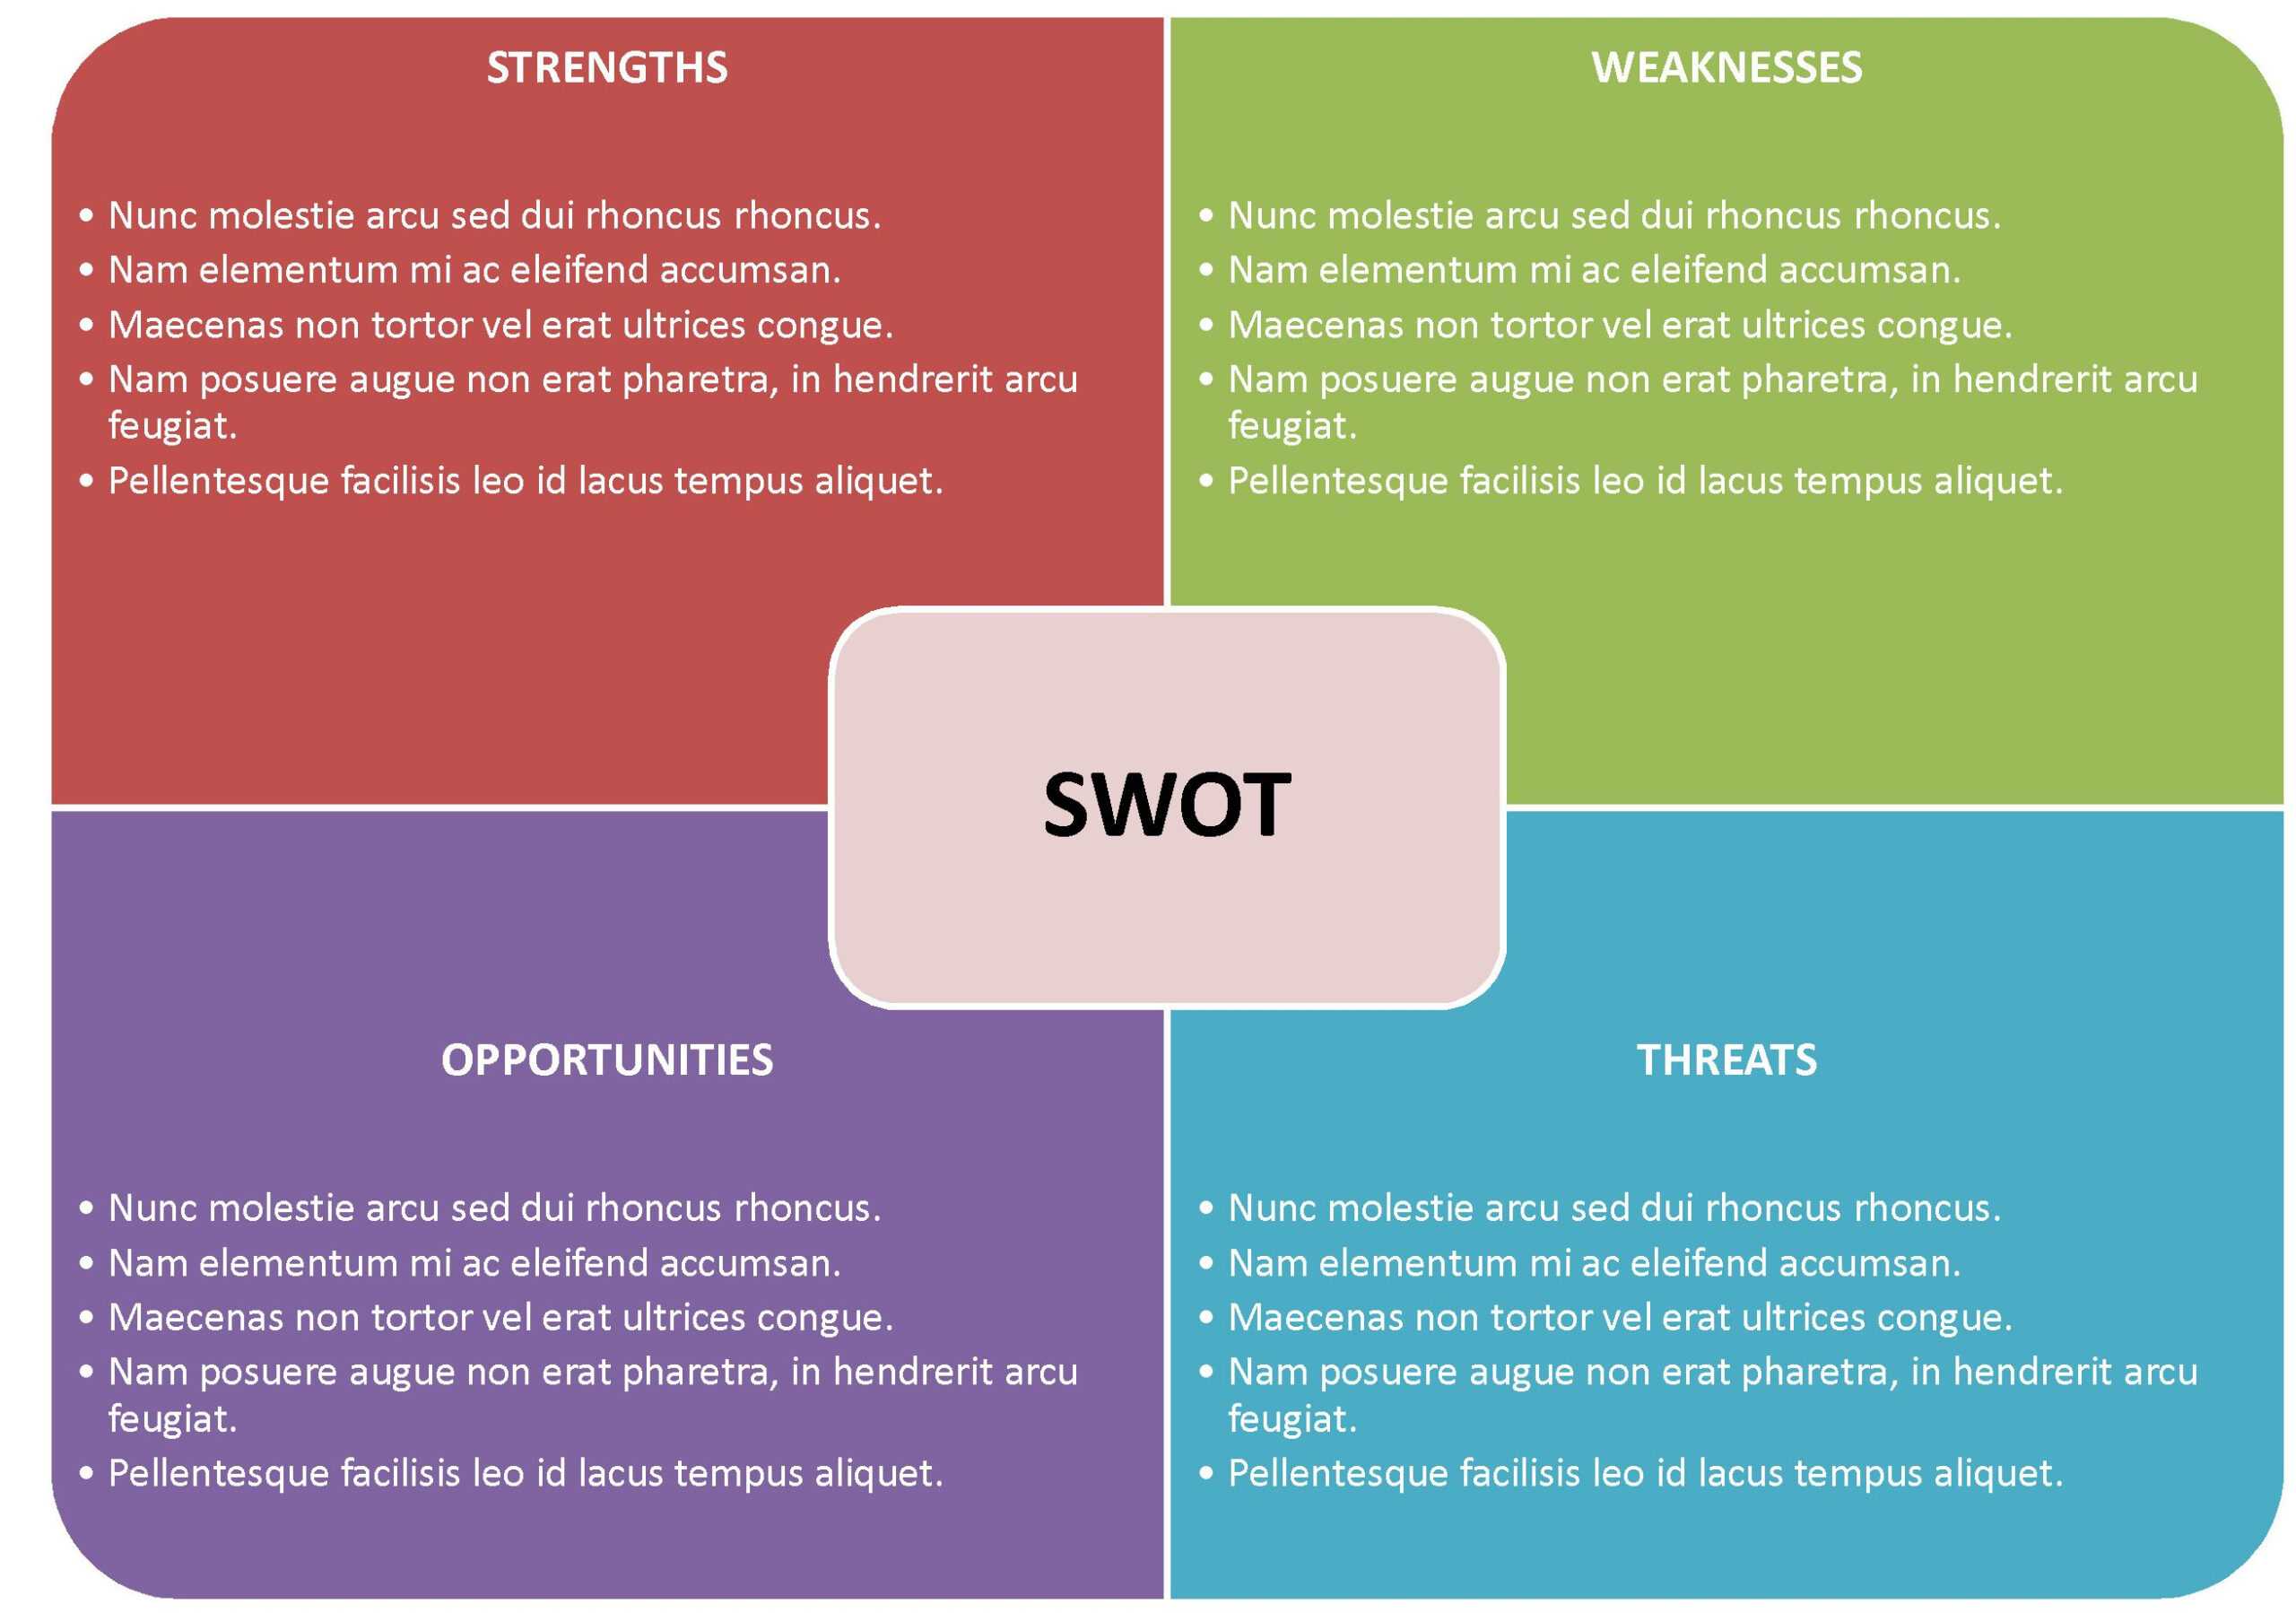 Ede79 Free Swot Template Word | Wiring Resources Inside Swot Template For Word